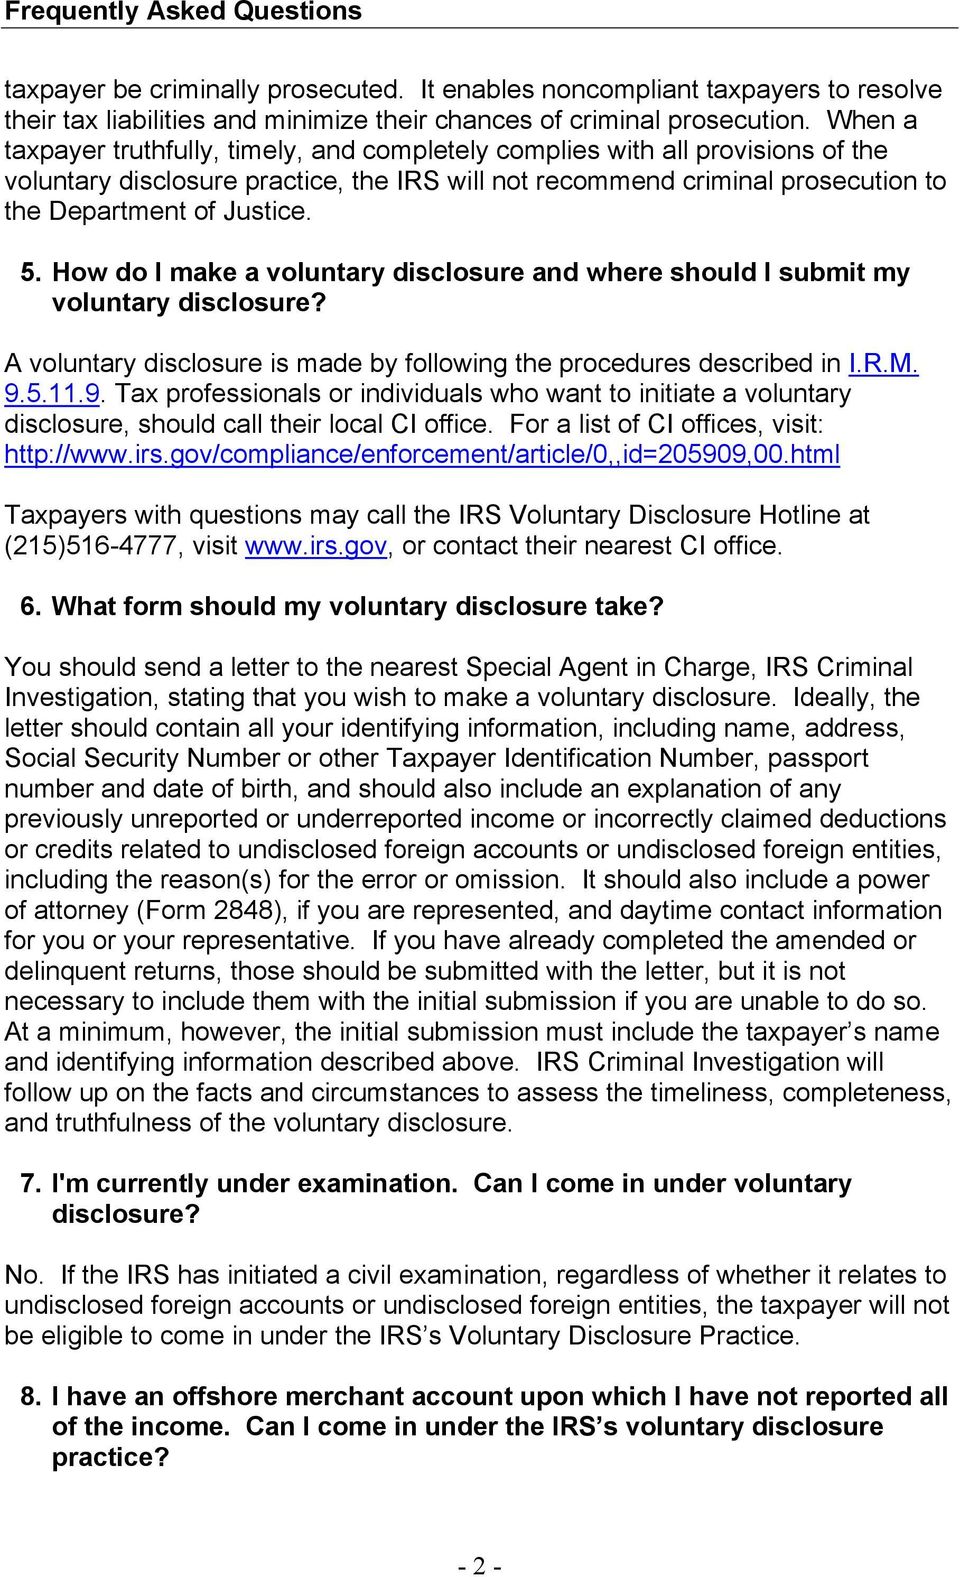 How do I make a voluntary disclosure and where should I submit my voluntary disclosure? A voluntary disclosure is made by following the procedures described in I.R.M. 9.